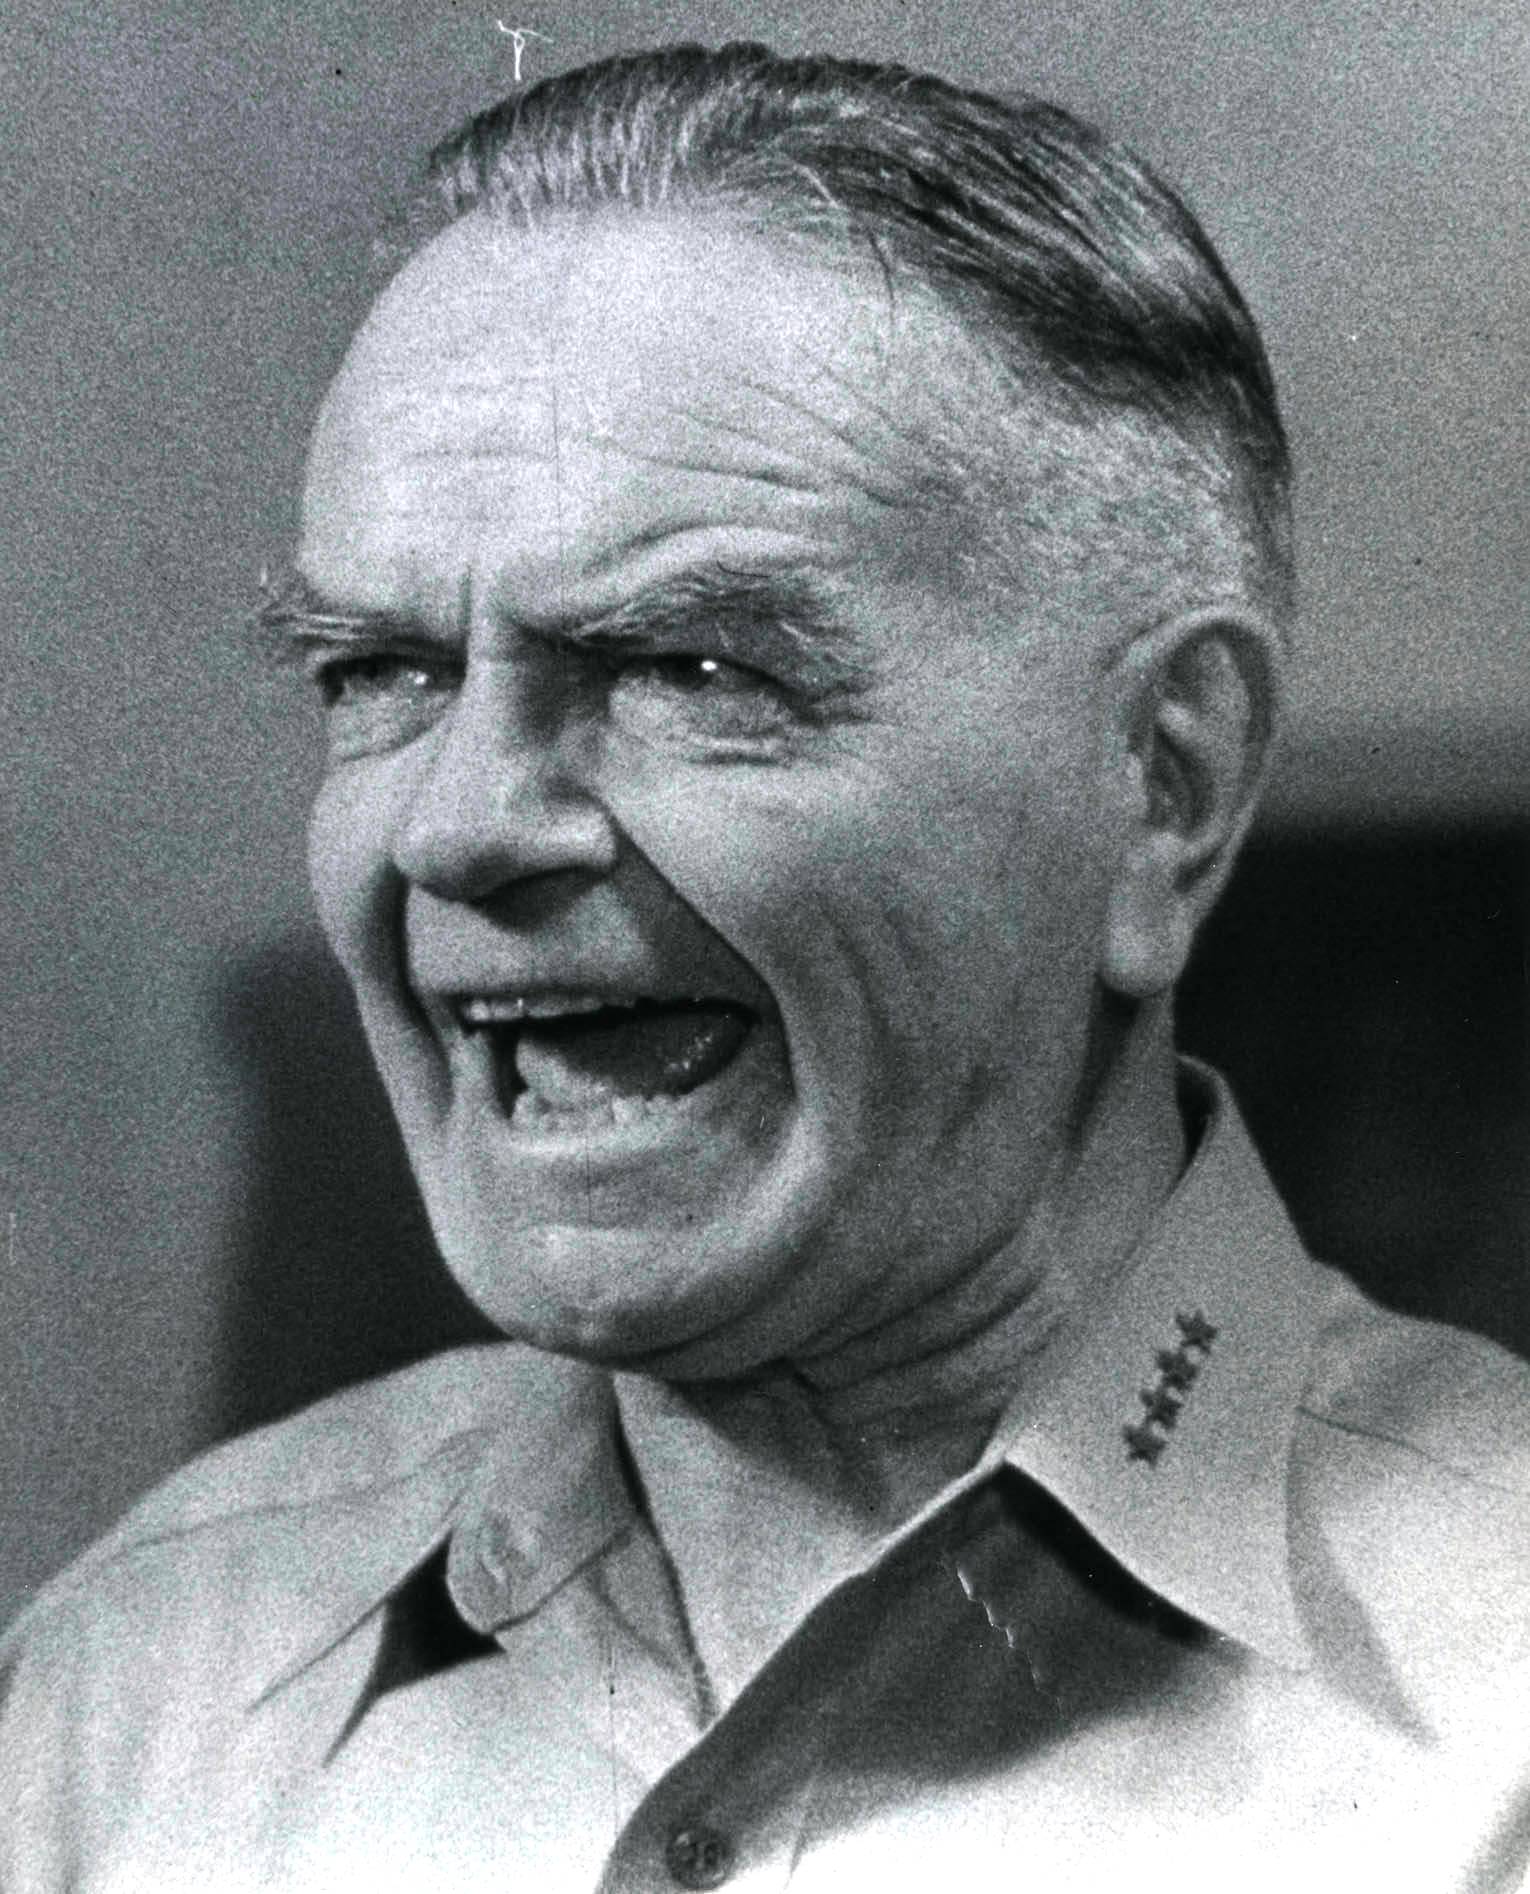 Admiral William Halsey aboard his flagship USS Missouri upon hearing the news that Japan offered to surrender, 11 Aug 1945.